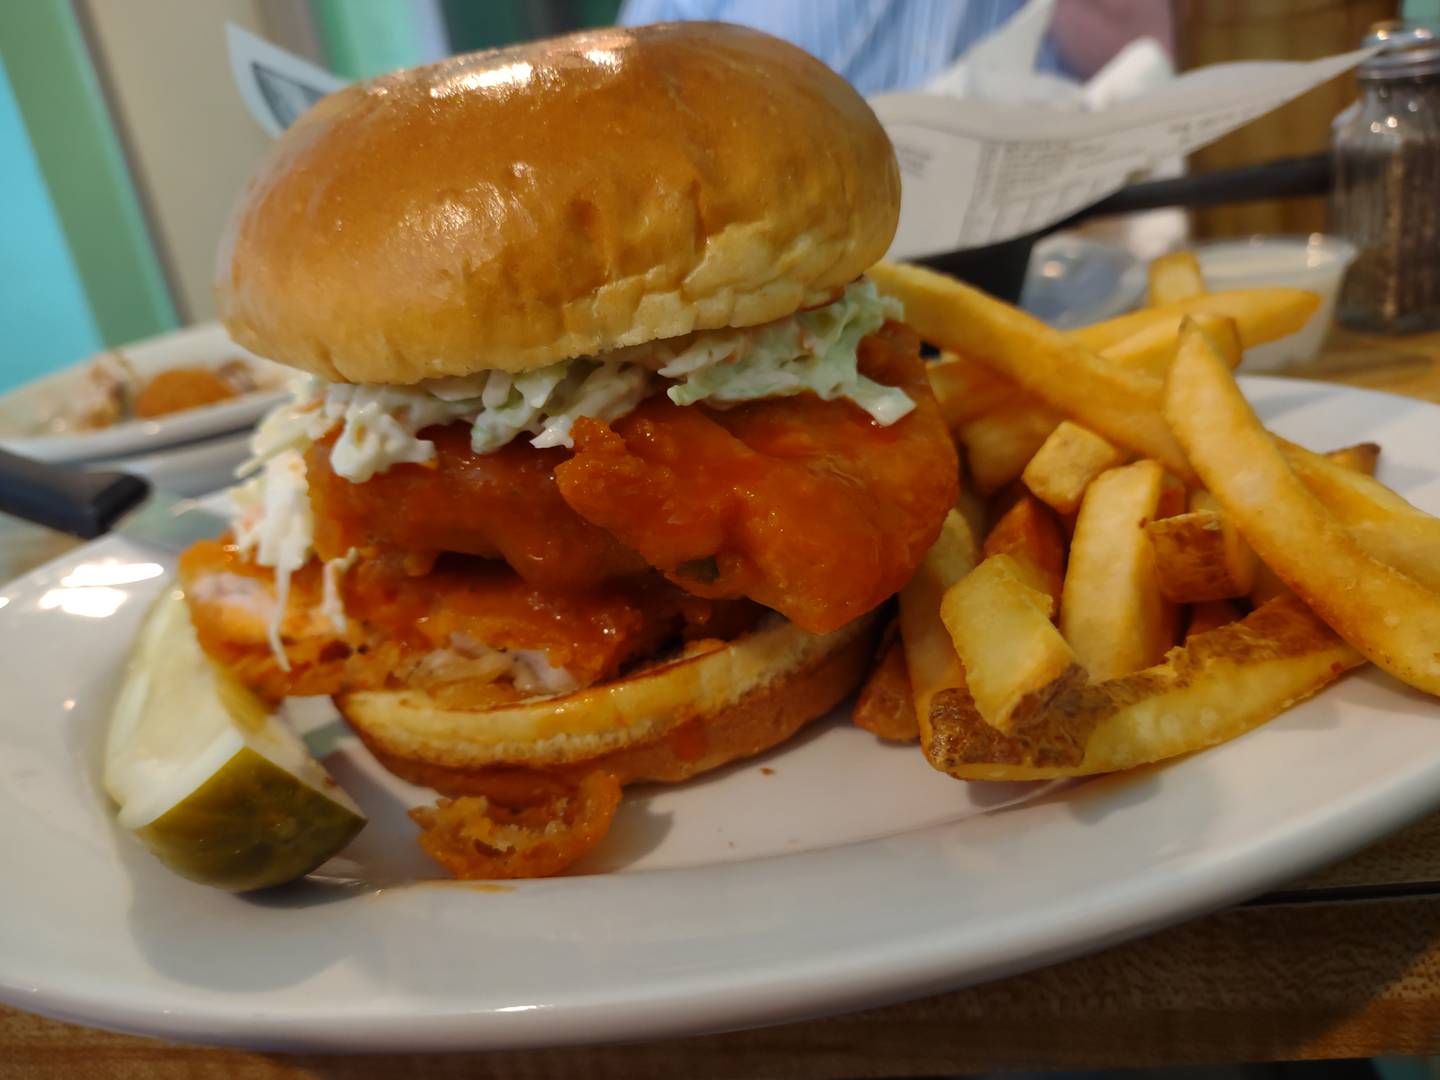 The Nashville chicken sandwich delivers a large breaded chicken breast coated in Nashville sauce and coleslaw at Maria's Cafe Bistro in Ottawa.